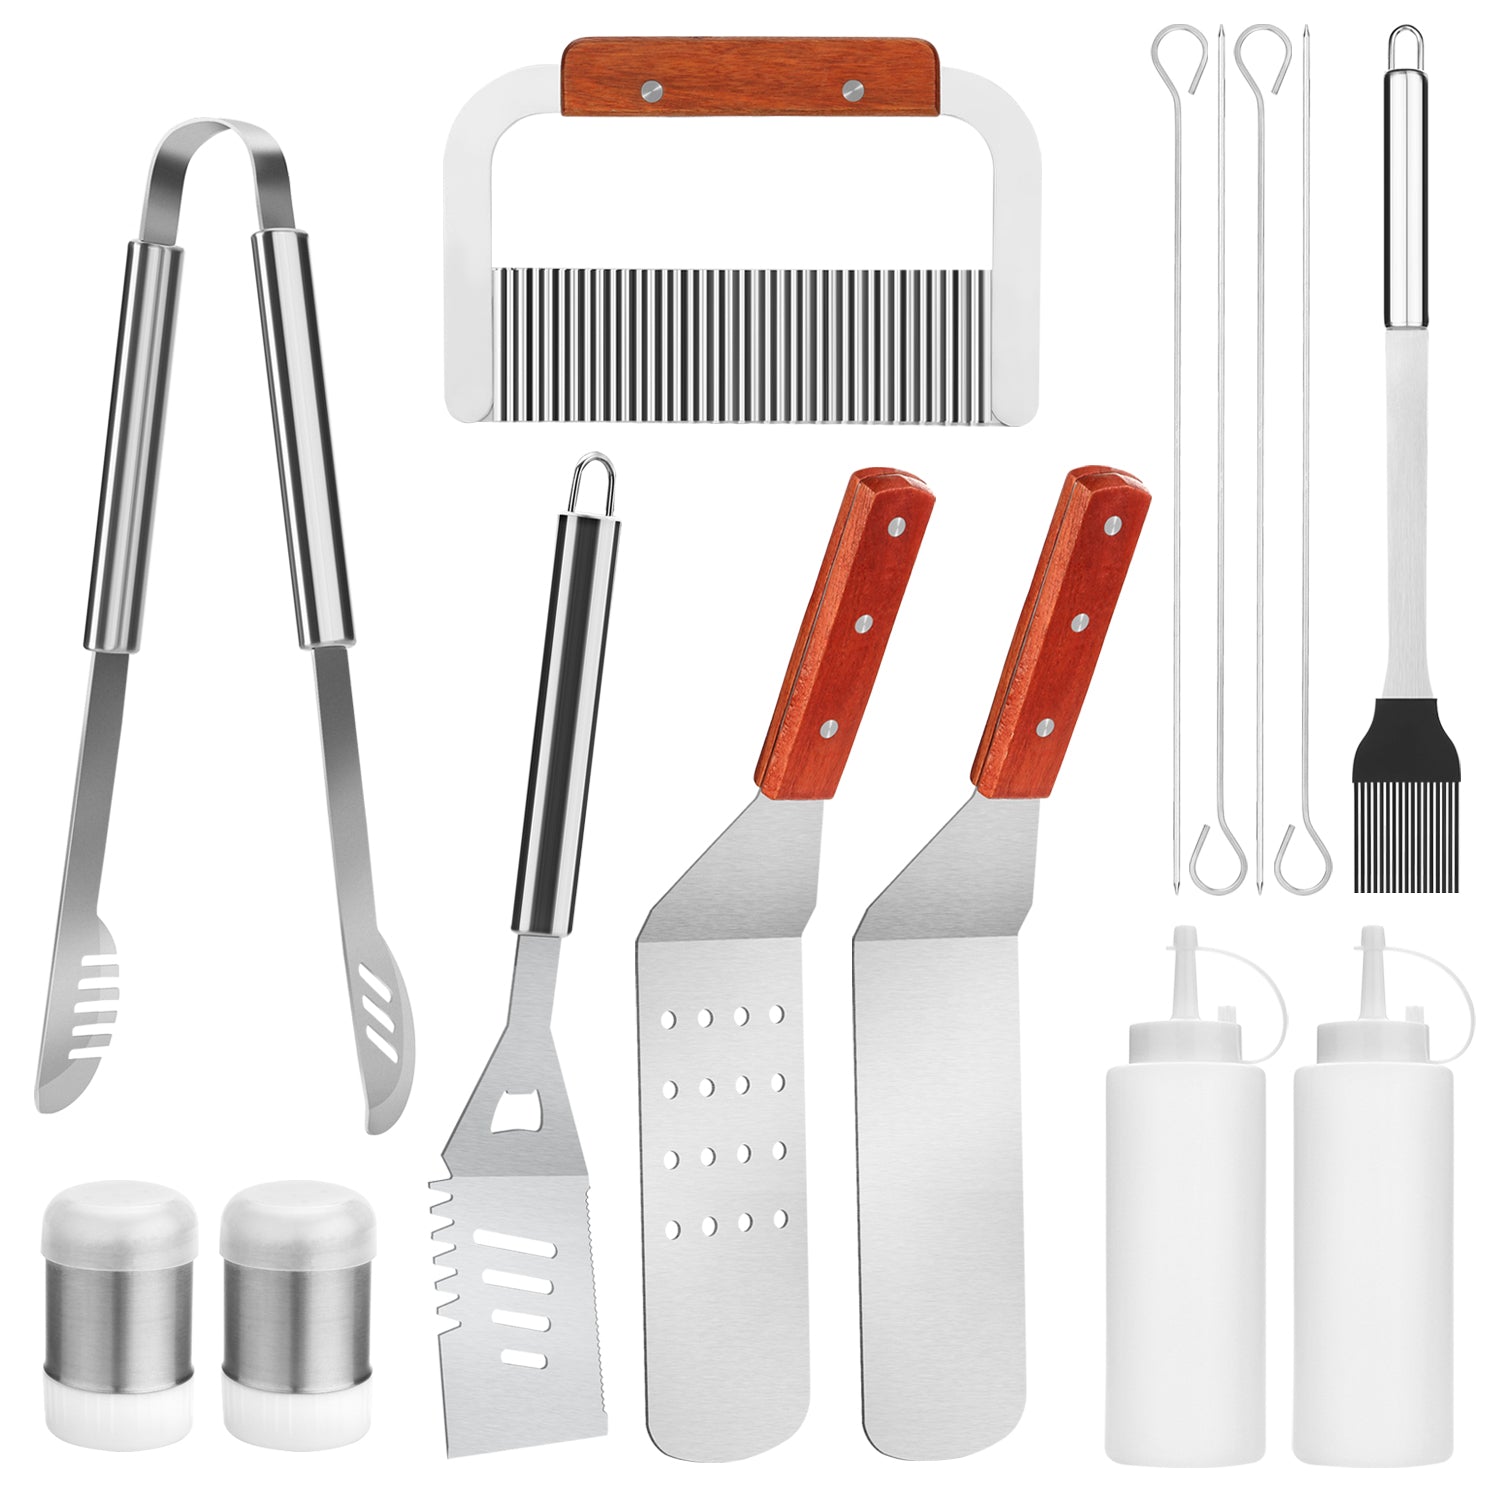 Image 14 Pieces BBQ Grill Tool Set, Large Heavy Duty Stainless Steel Grilling Kit - M - Silver